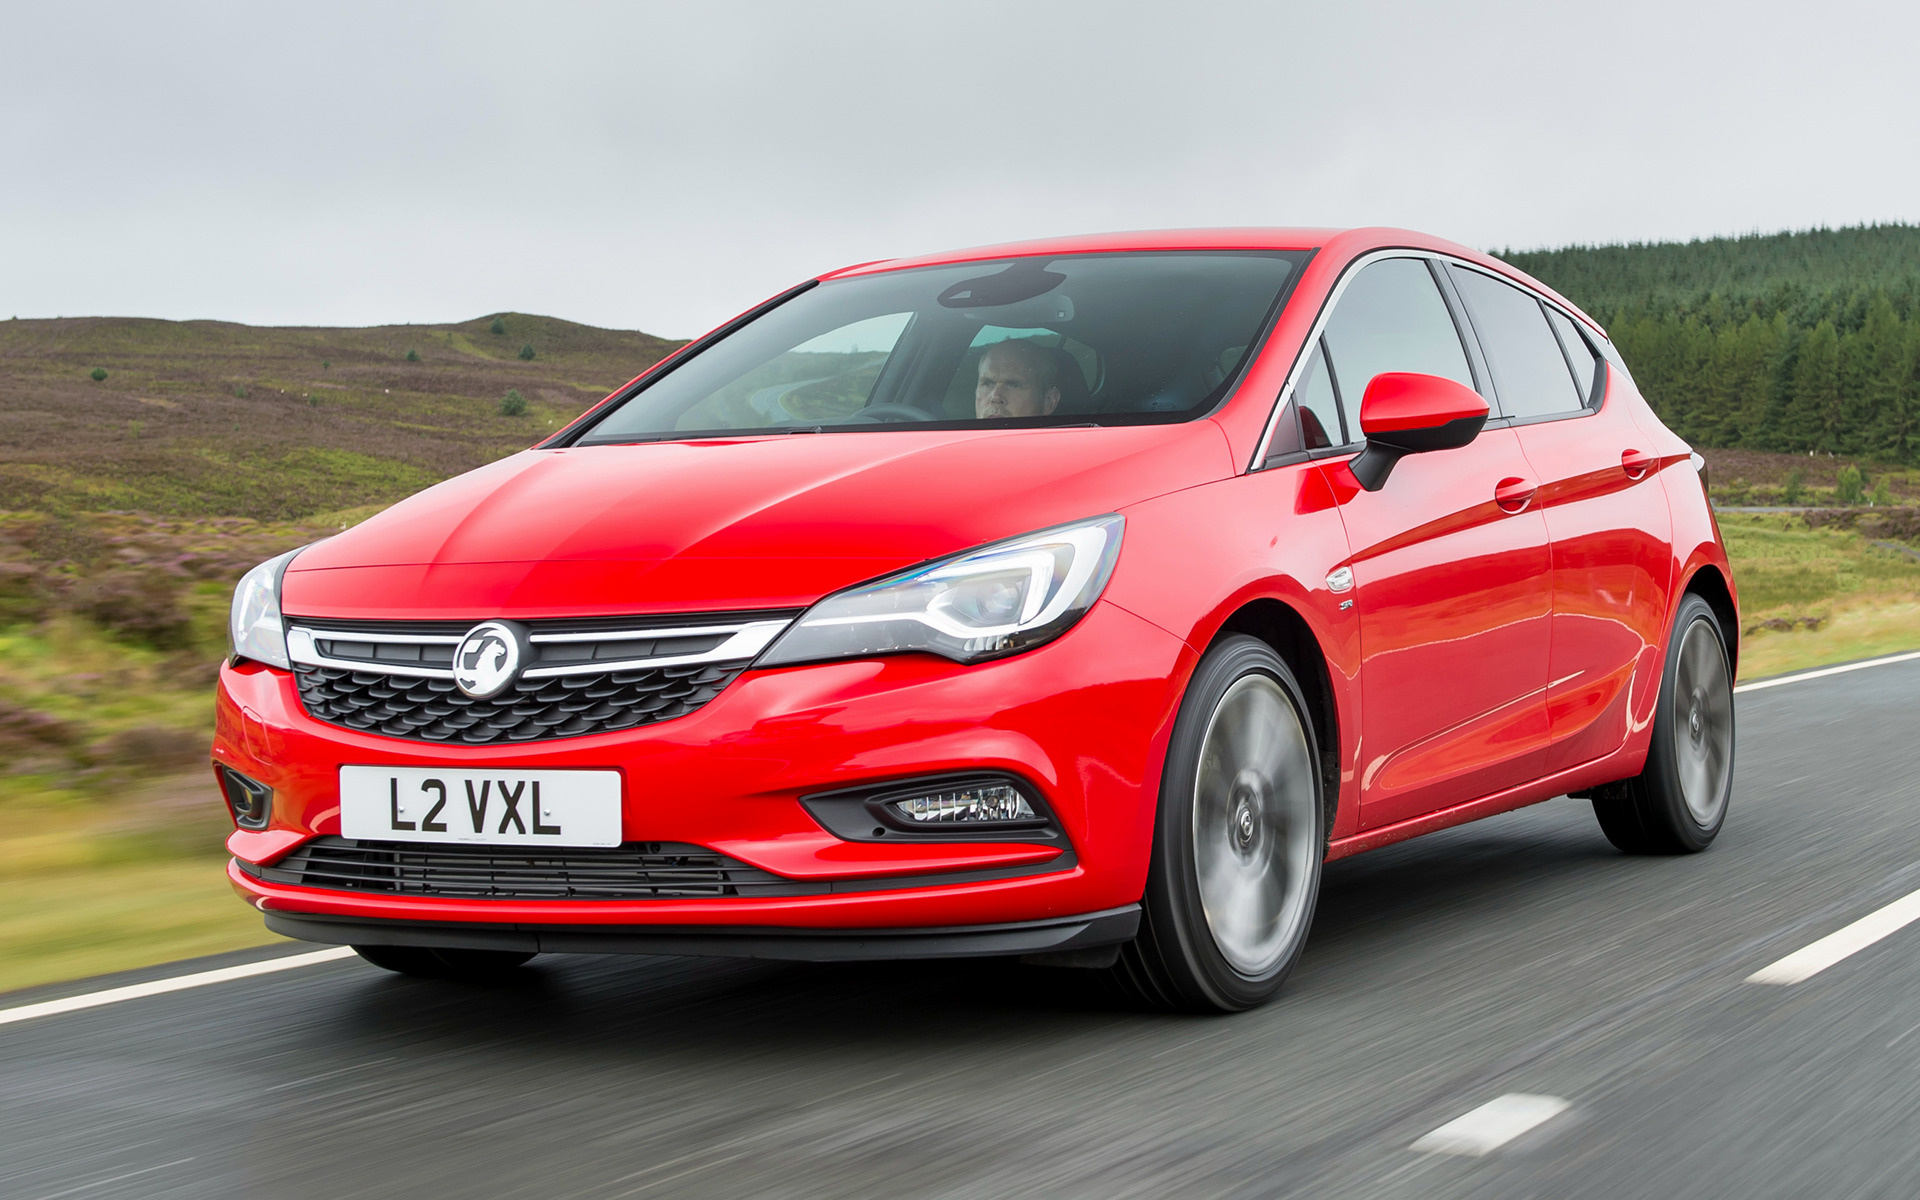 2015 Vauxhall Astra - Wallpapers and HD Images | Car Pixel